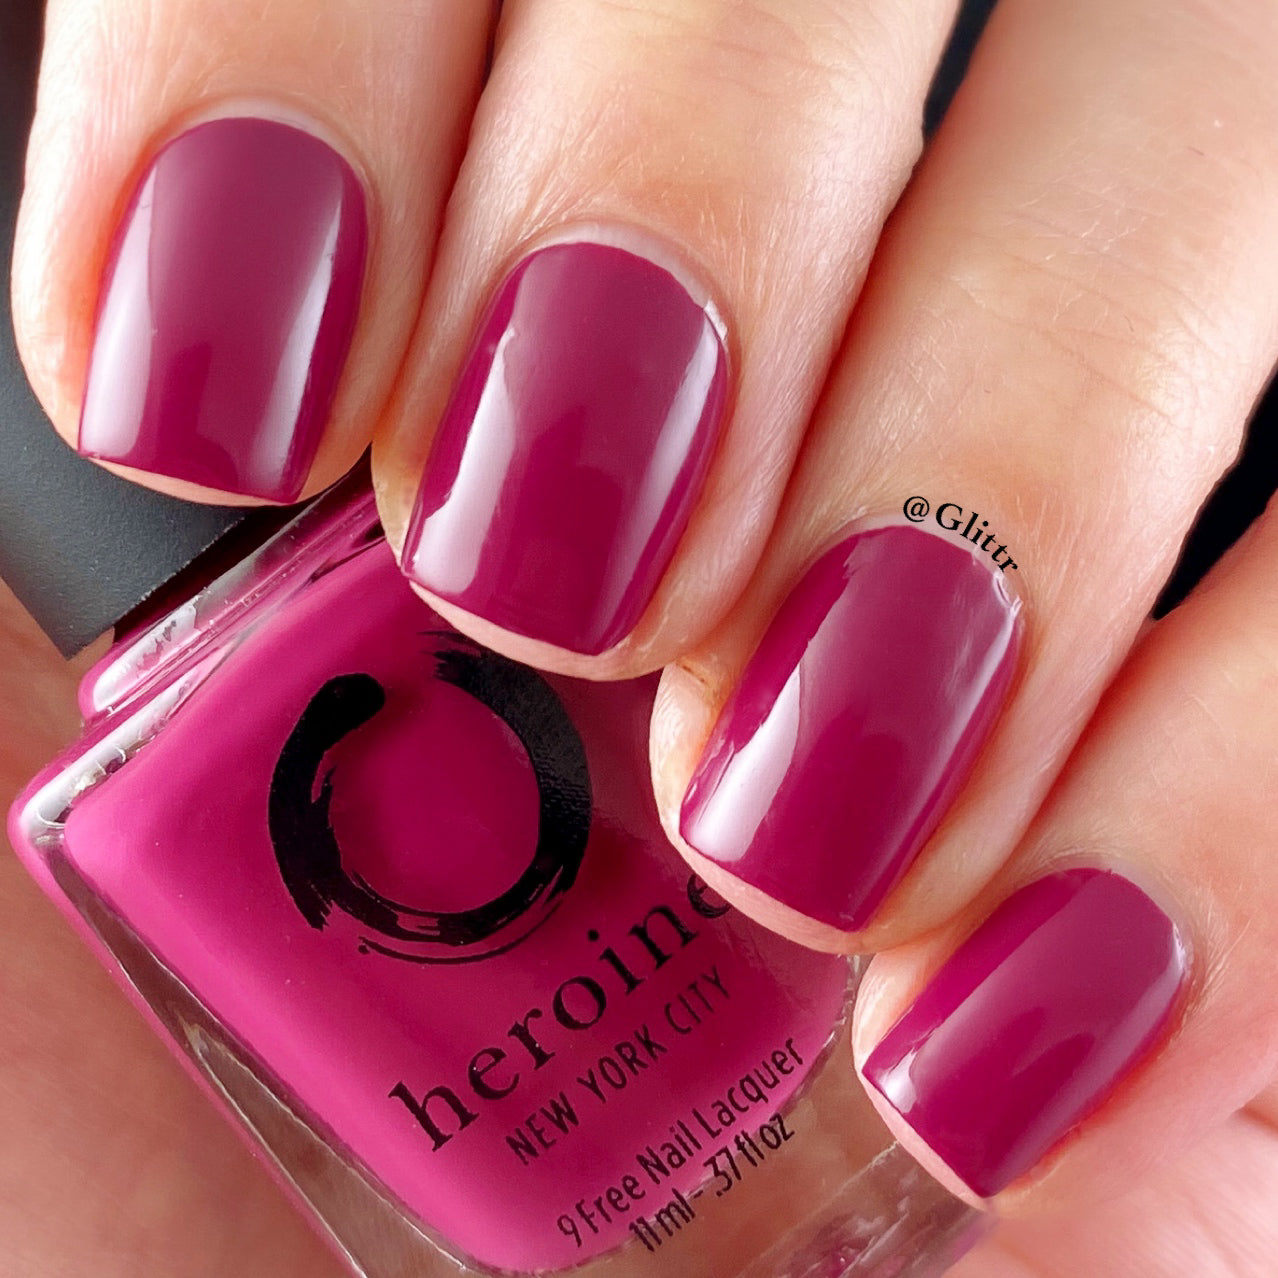 Partly Cloudy With a Chance of Lacquer: Born Pretty Store